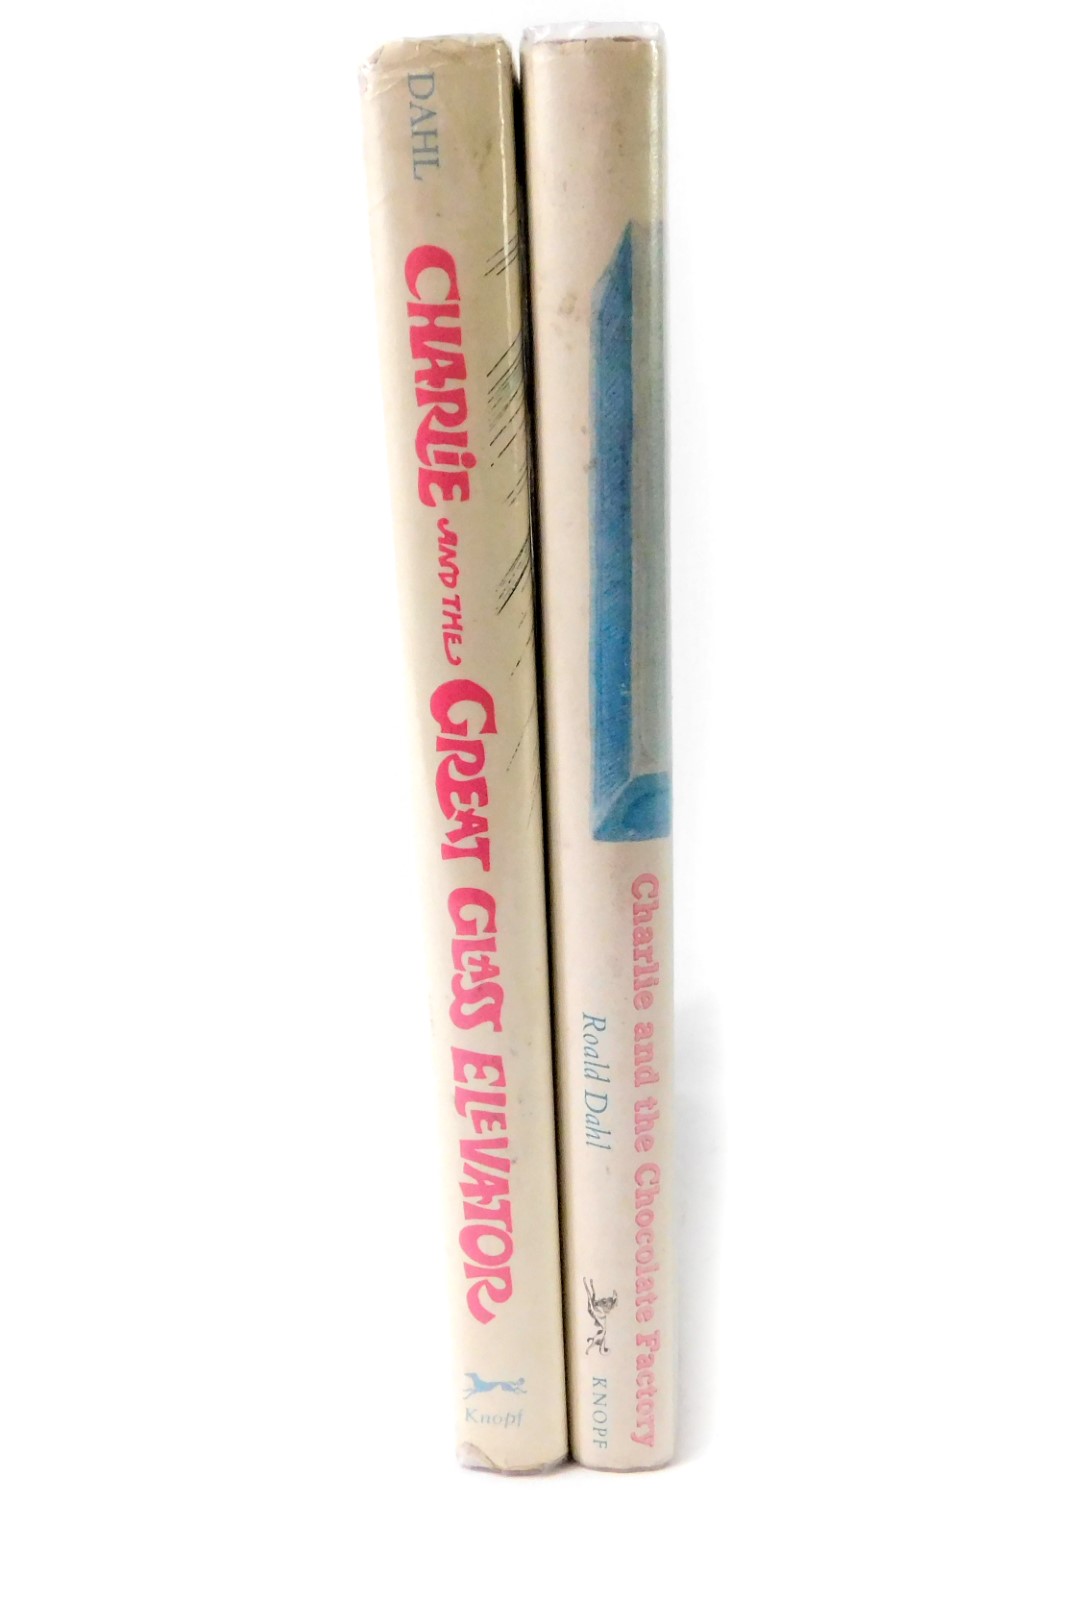 Roald Dahl. Charlie and The Chocolate Factory, first edition with dust wrapper, illustrated by